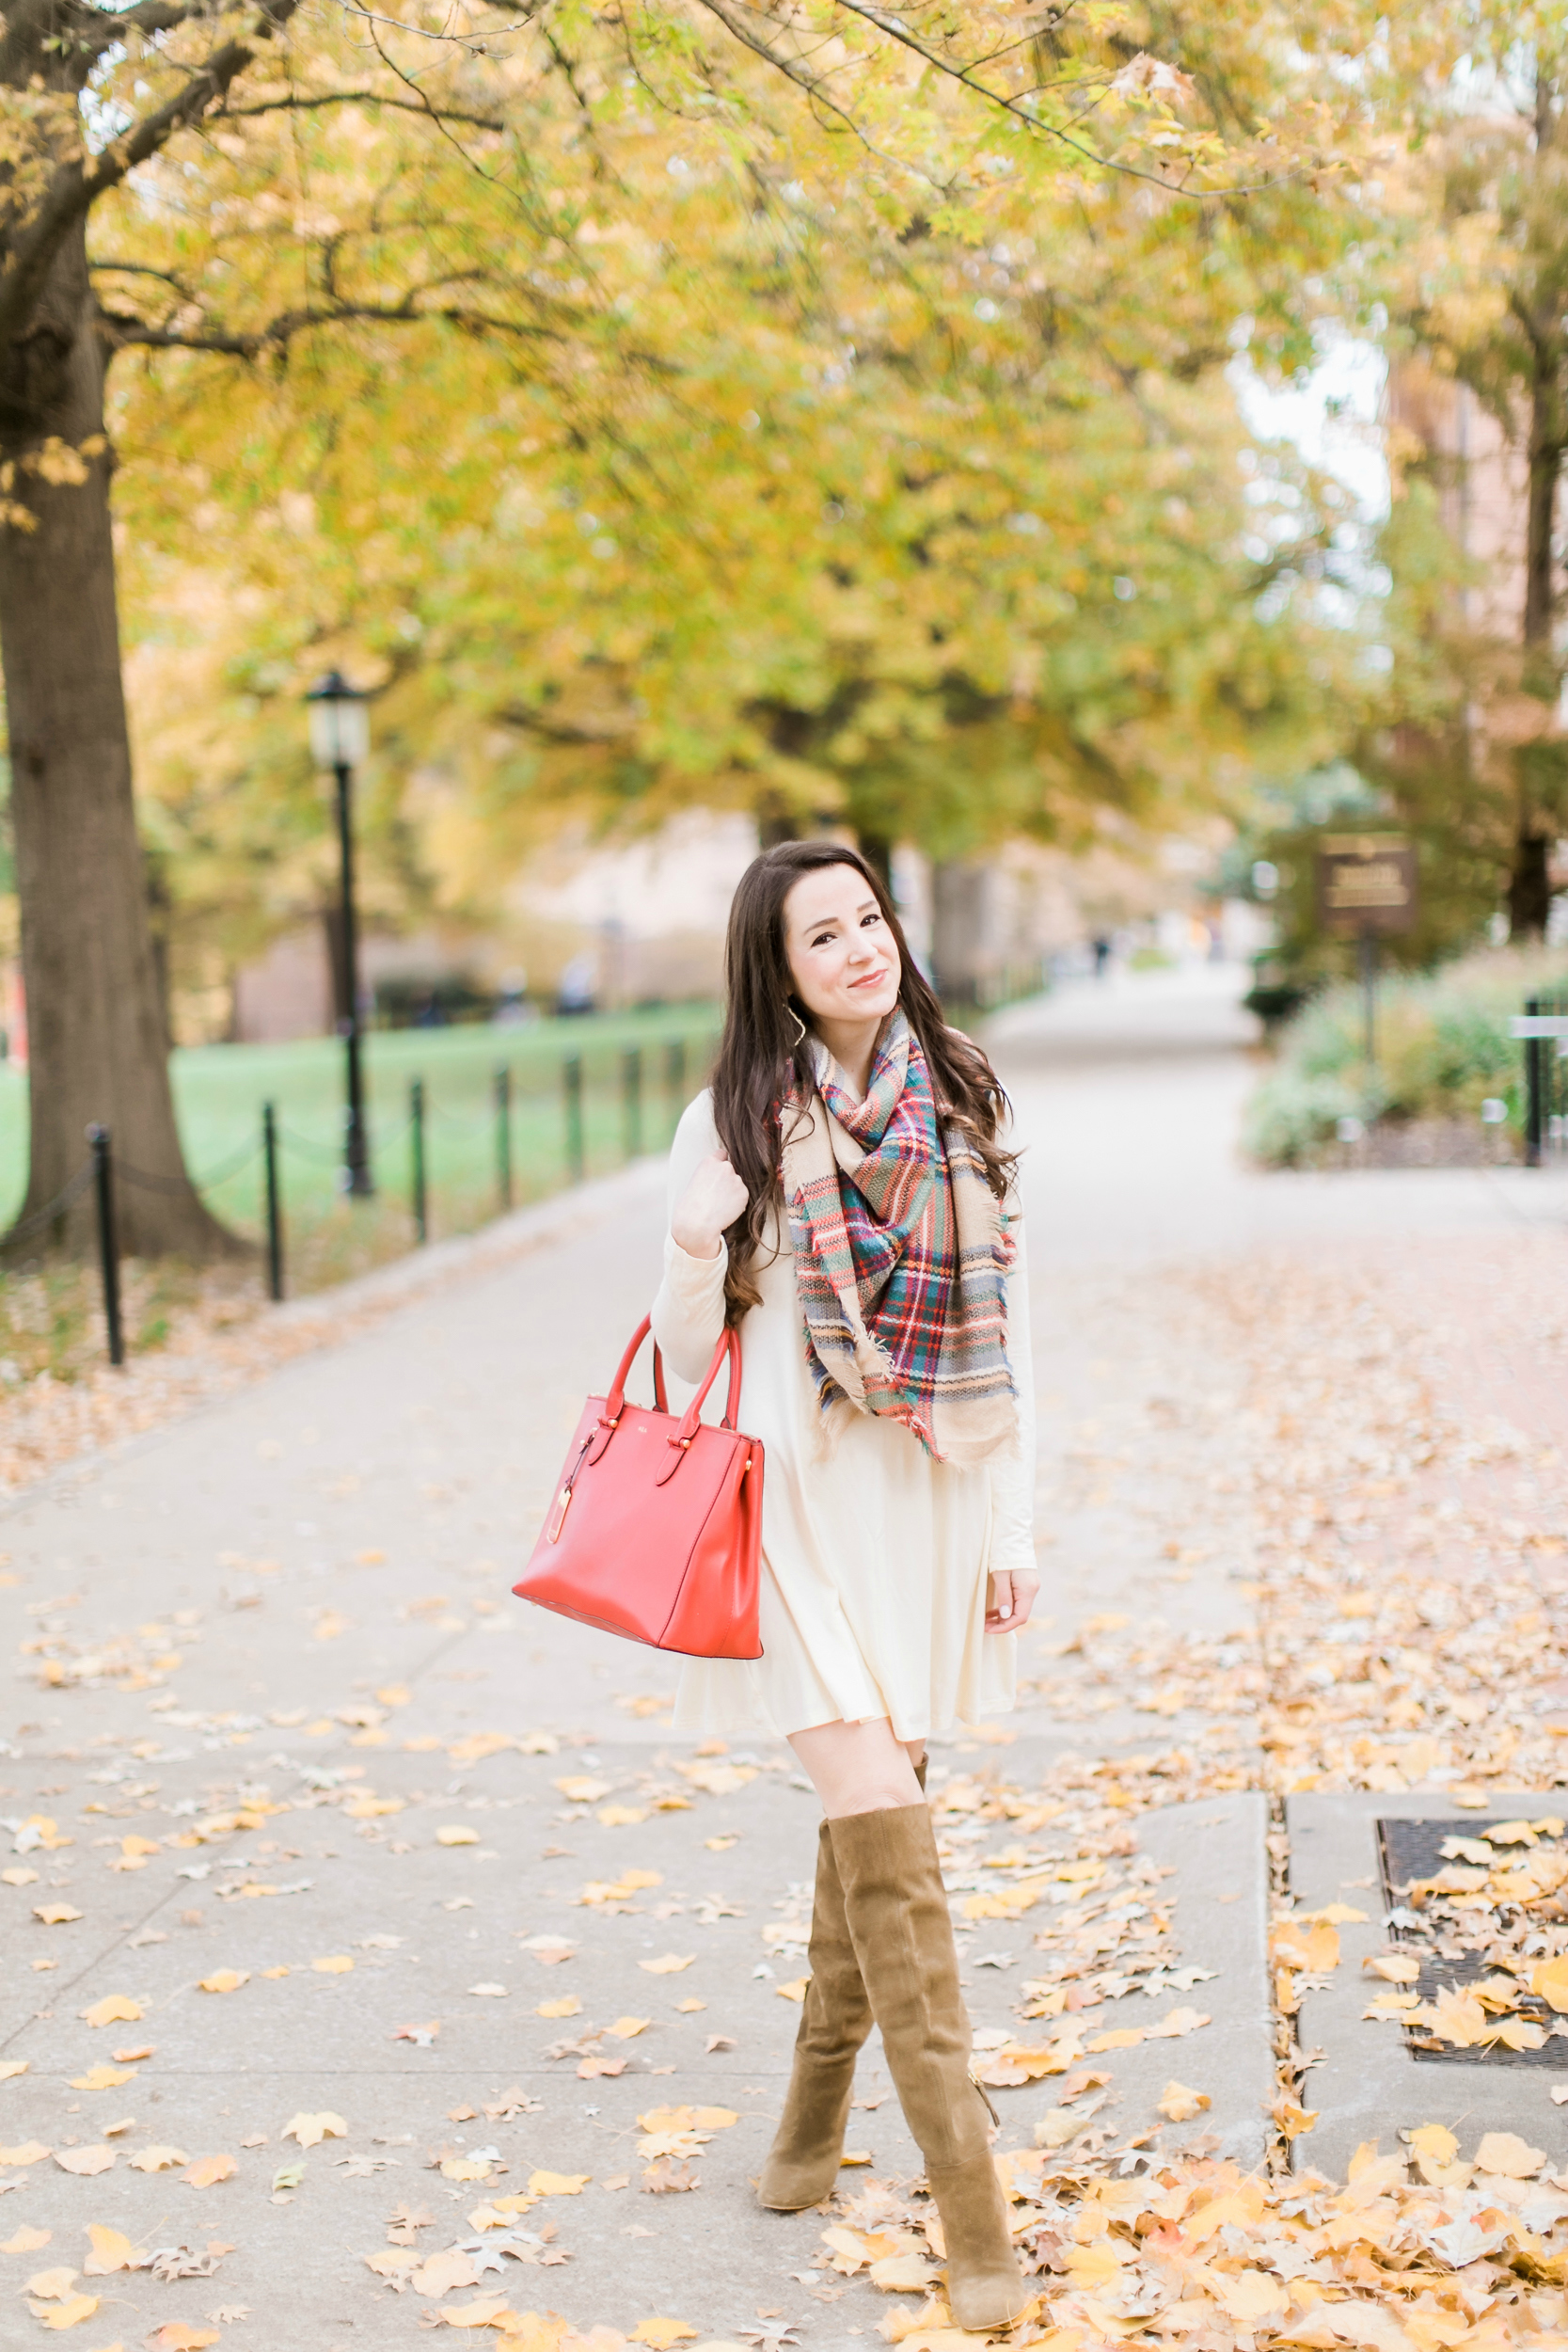 Beige cotton swing dress with tartan blanket scarf, Free People cognac OTK boots, red Ralph Lauren handbag, and Kendra Scott Sophee earrings | Casual holiday outfit idea | 10 tips for looking your best on camera | Tips for Looking Your Best in Holiday Photos from fashion blogger Stephanie Ziajka of Diary of a Debutante